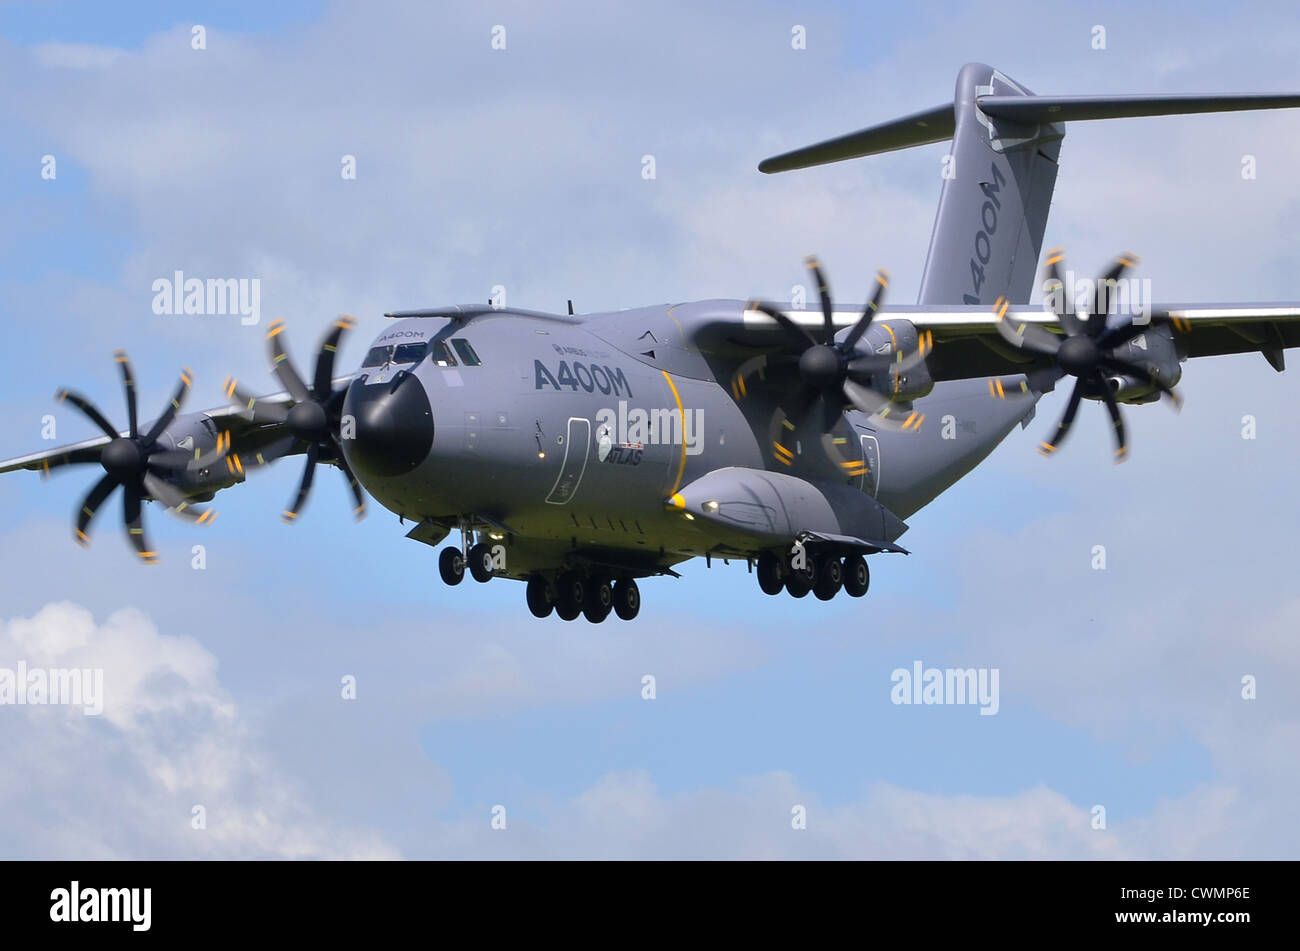 Airbus A400M Atlas on approach for landing at RAF Fairford. The A400m transport aircraft is built by Airbus Military. Stock Photo